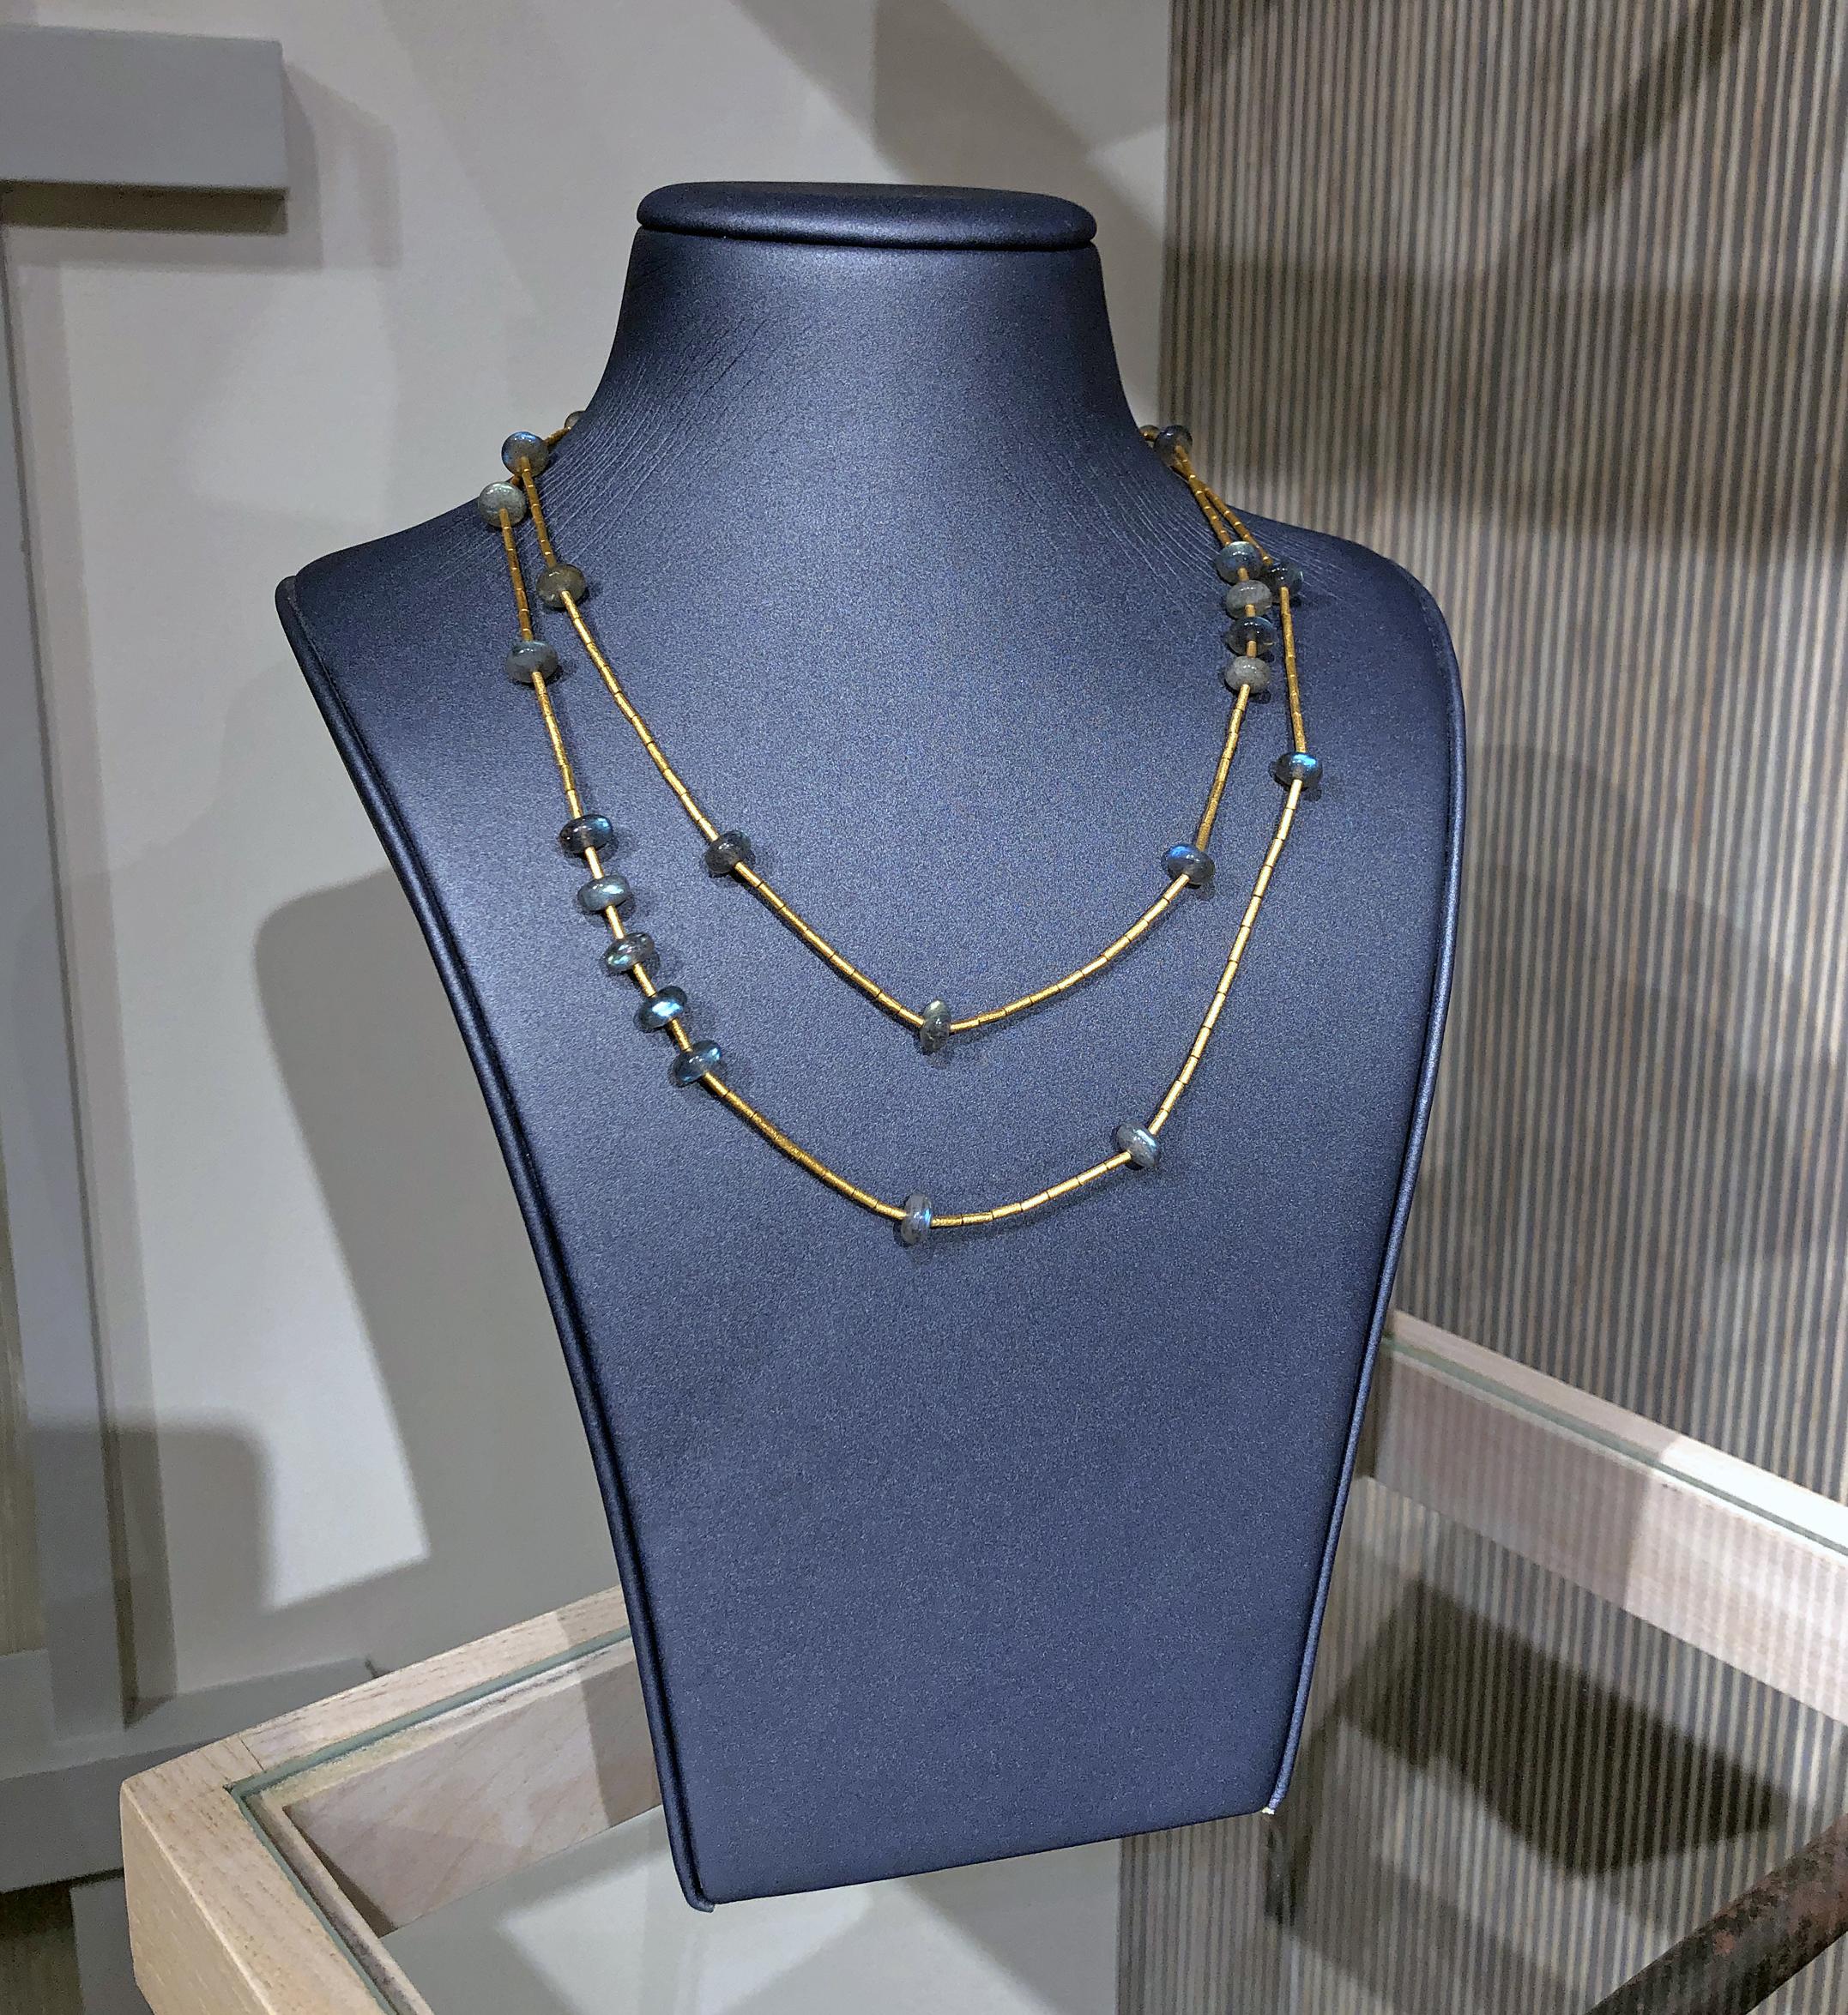 Long Necklace handmade by jewelry artist Lika Behar in 24k gold with 57.44 total carats of labradorite. 

37